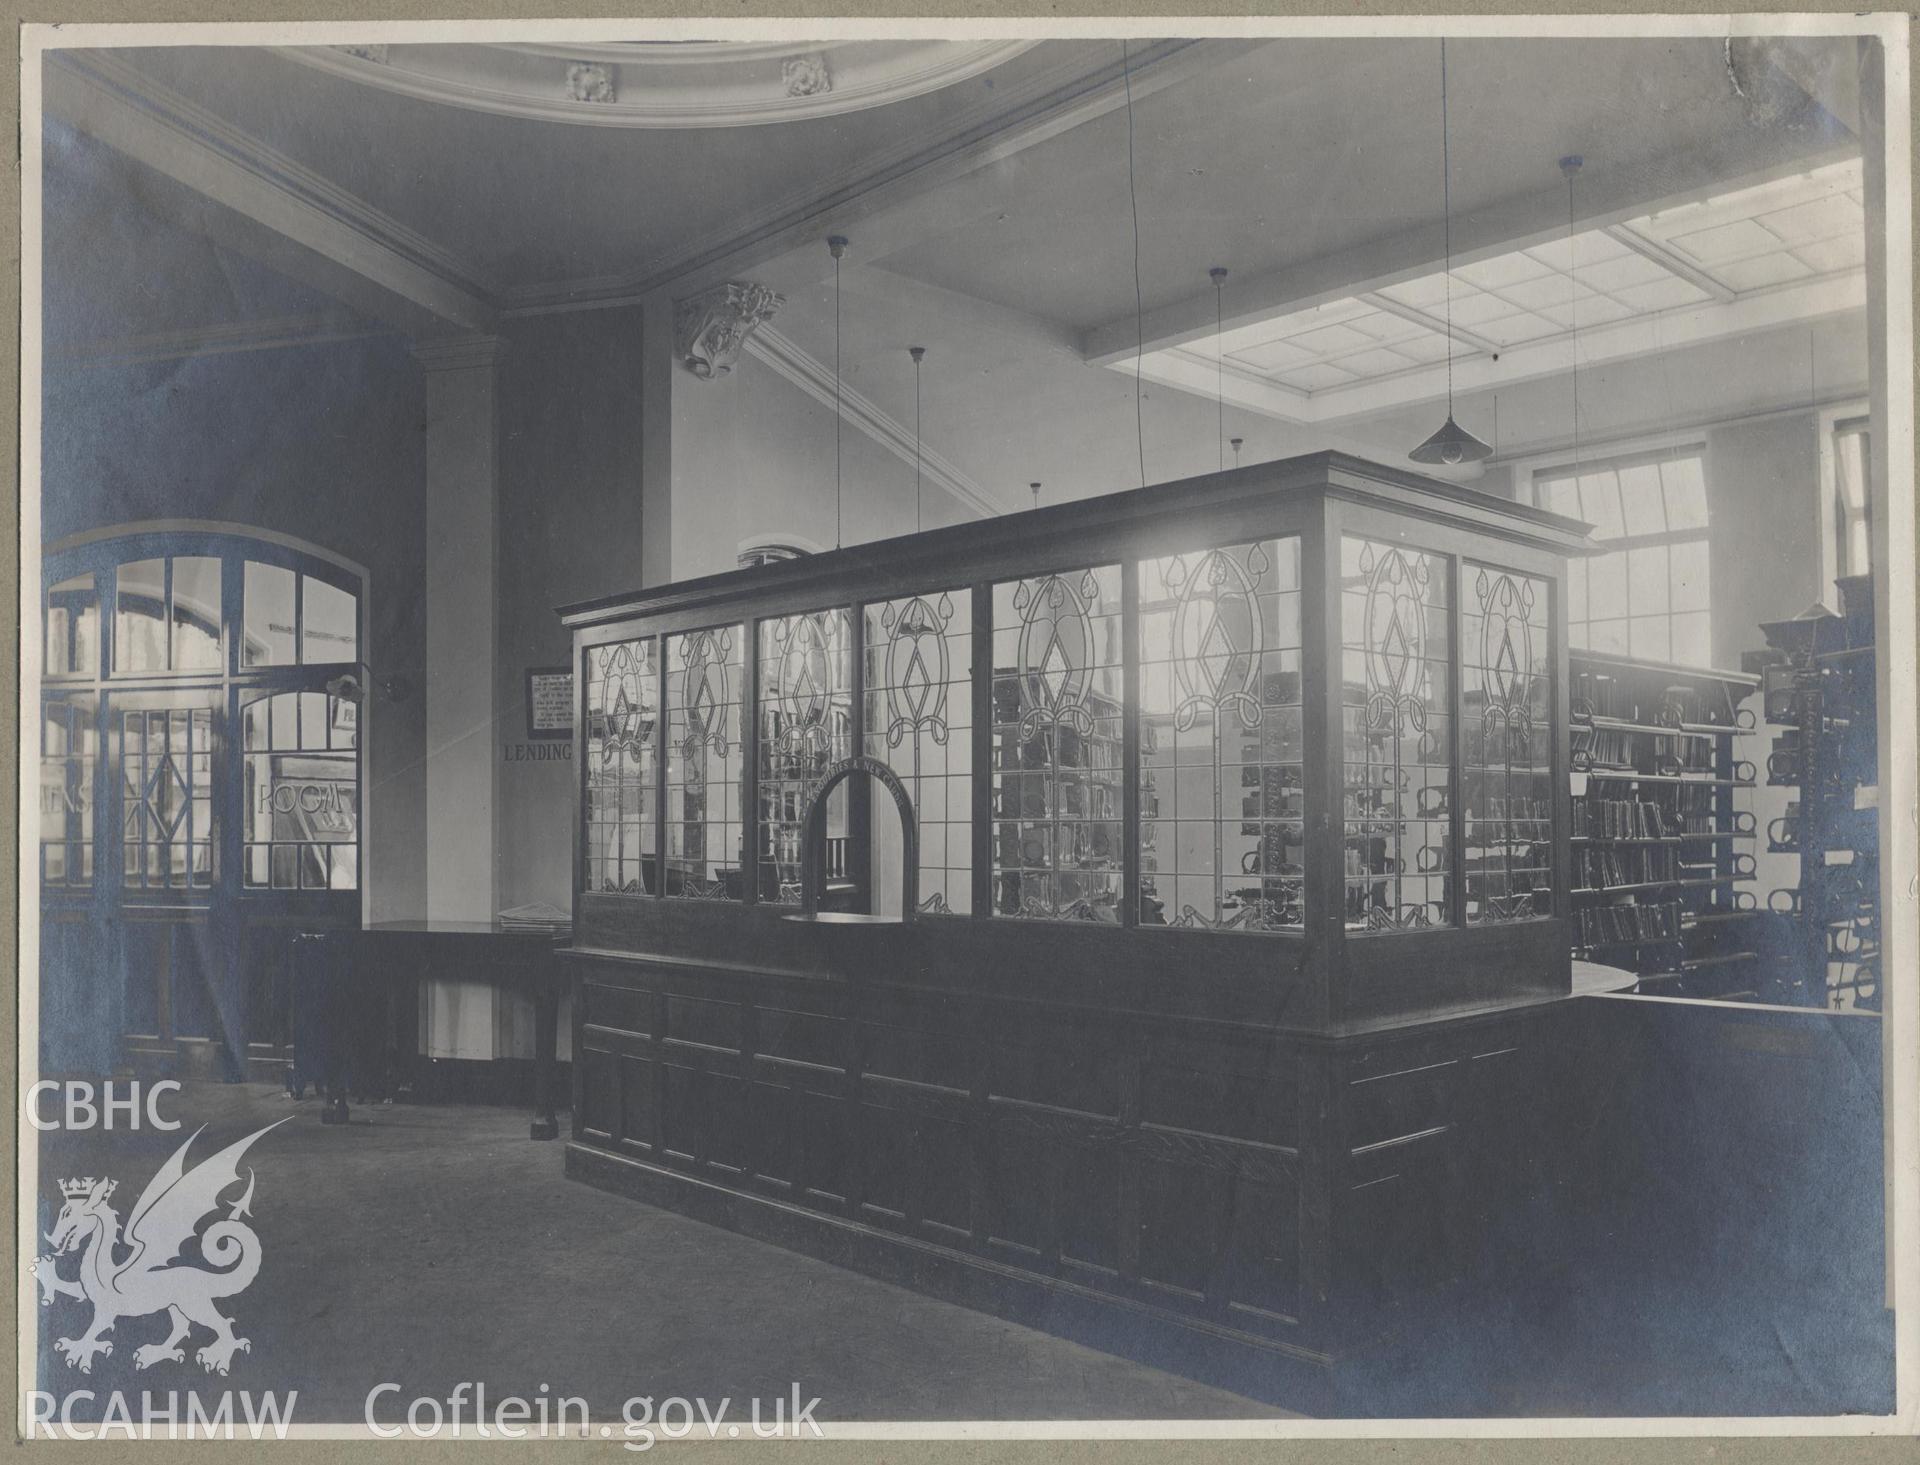 Black and white photograph showing part of the interior of Cathays Public Library, Cardiff.